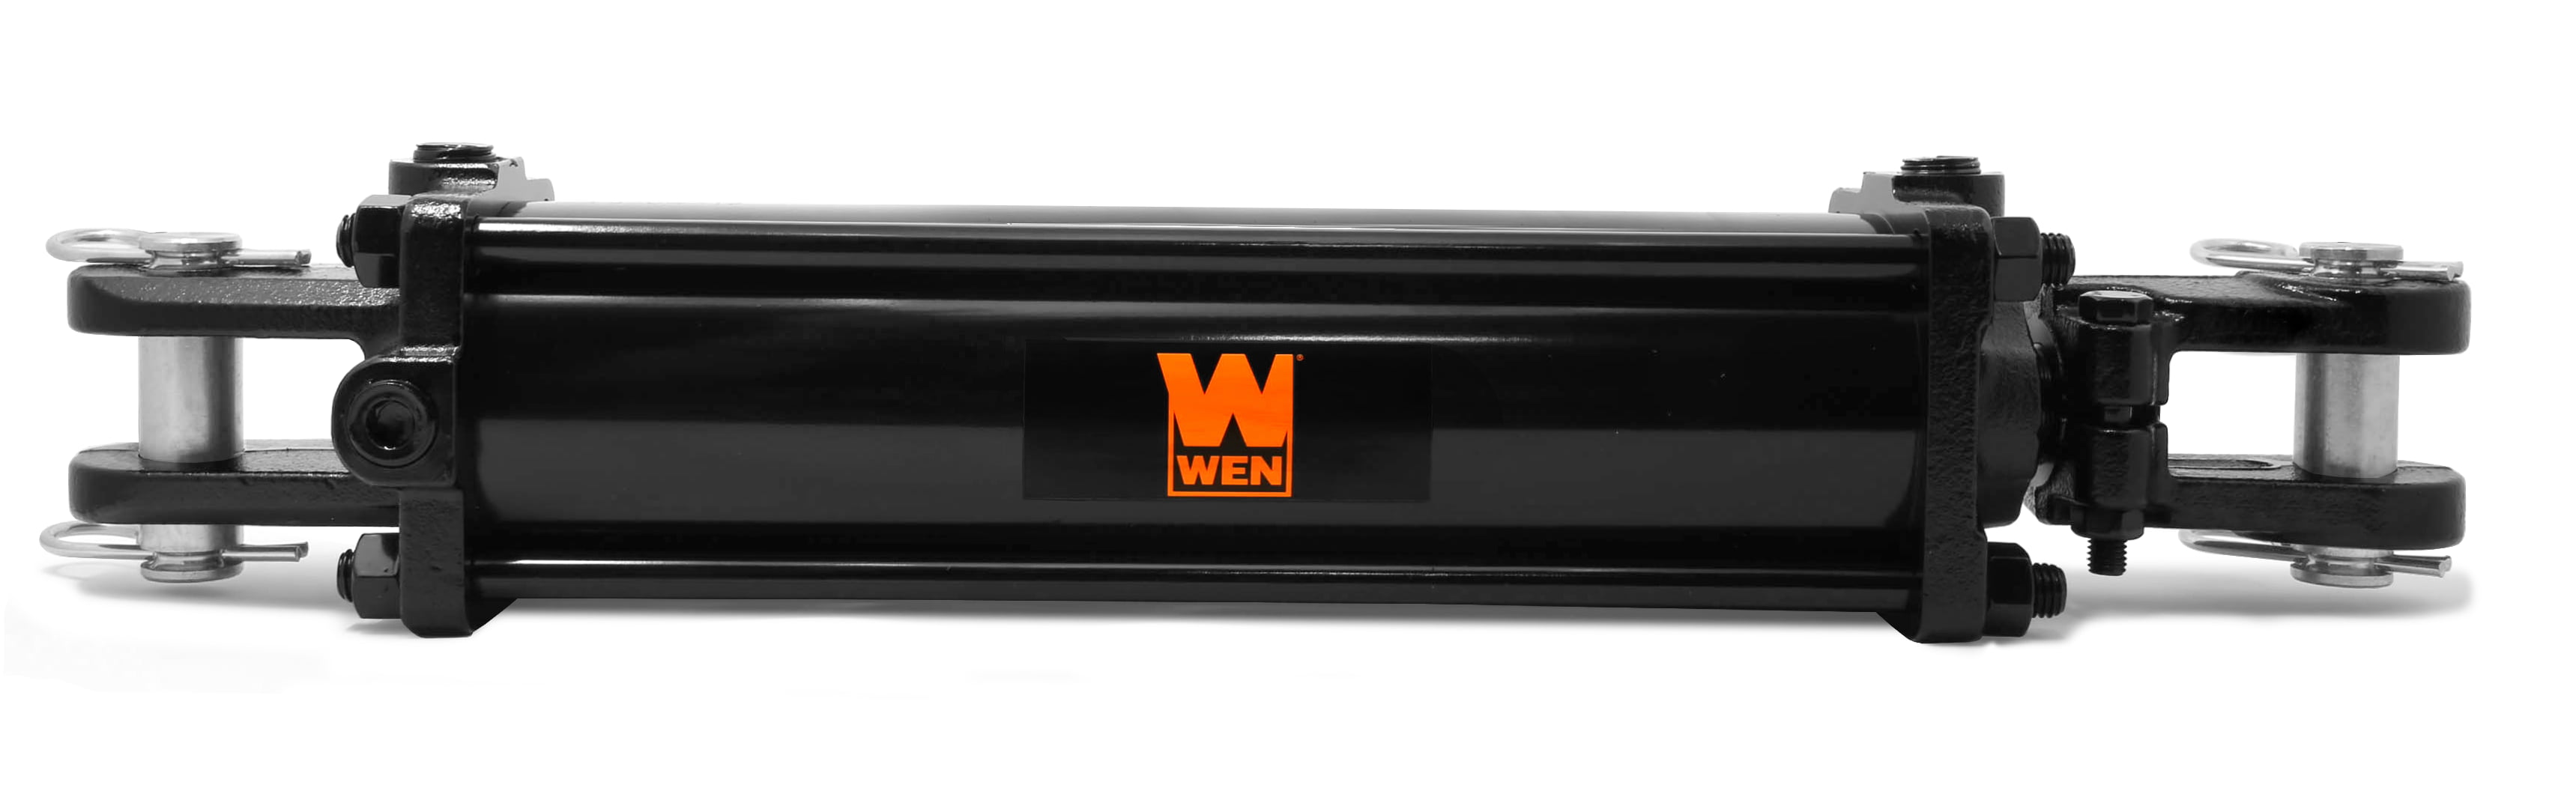 WEN TR3512 2500 PSI Tie Rod Hydraulic Cylinder with 3.5" Bore and 12" Stroke 